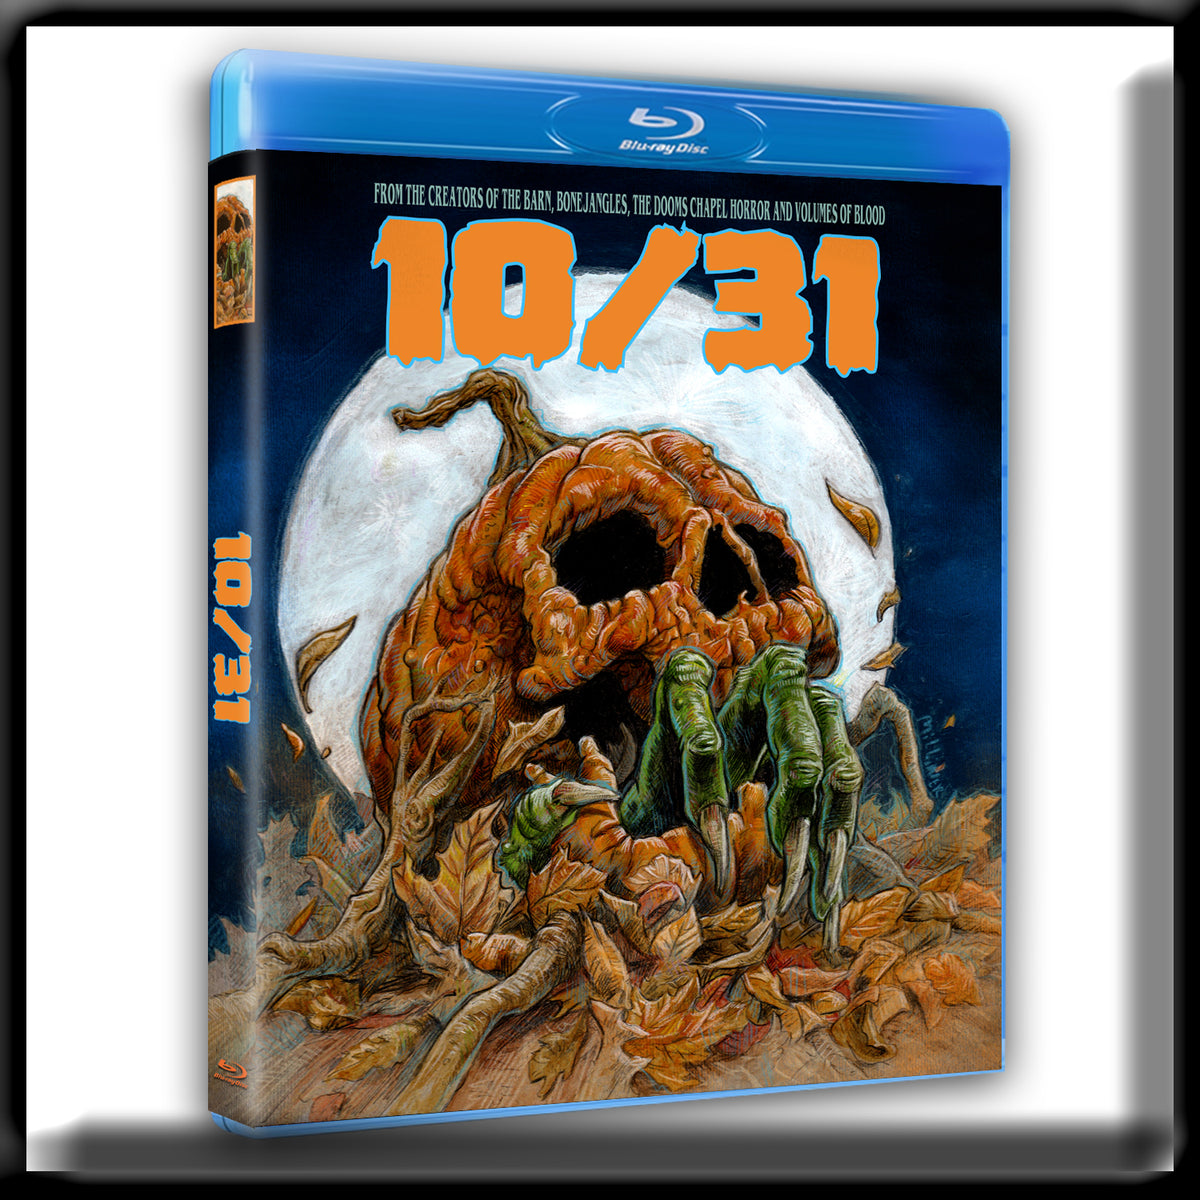 10/31 - Special Collectors Edition (Blu-ray) – Scream Team Releasing